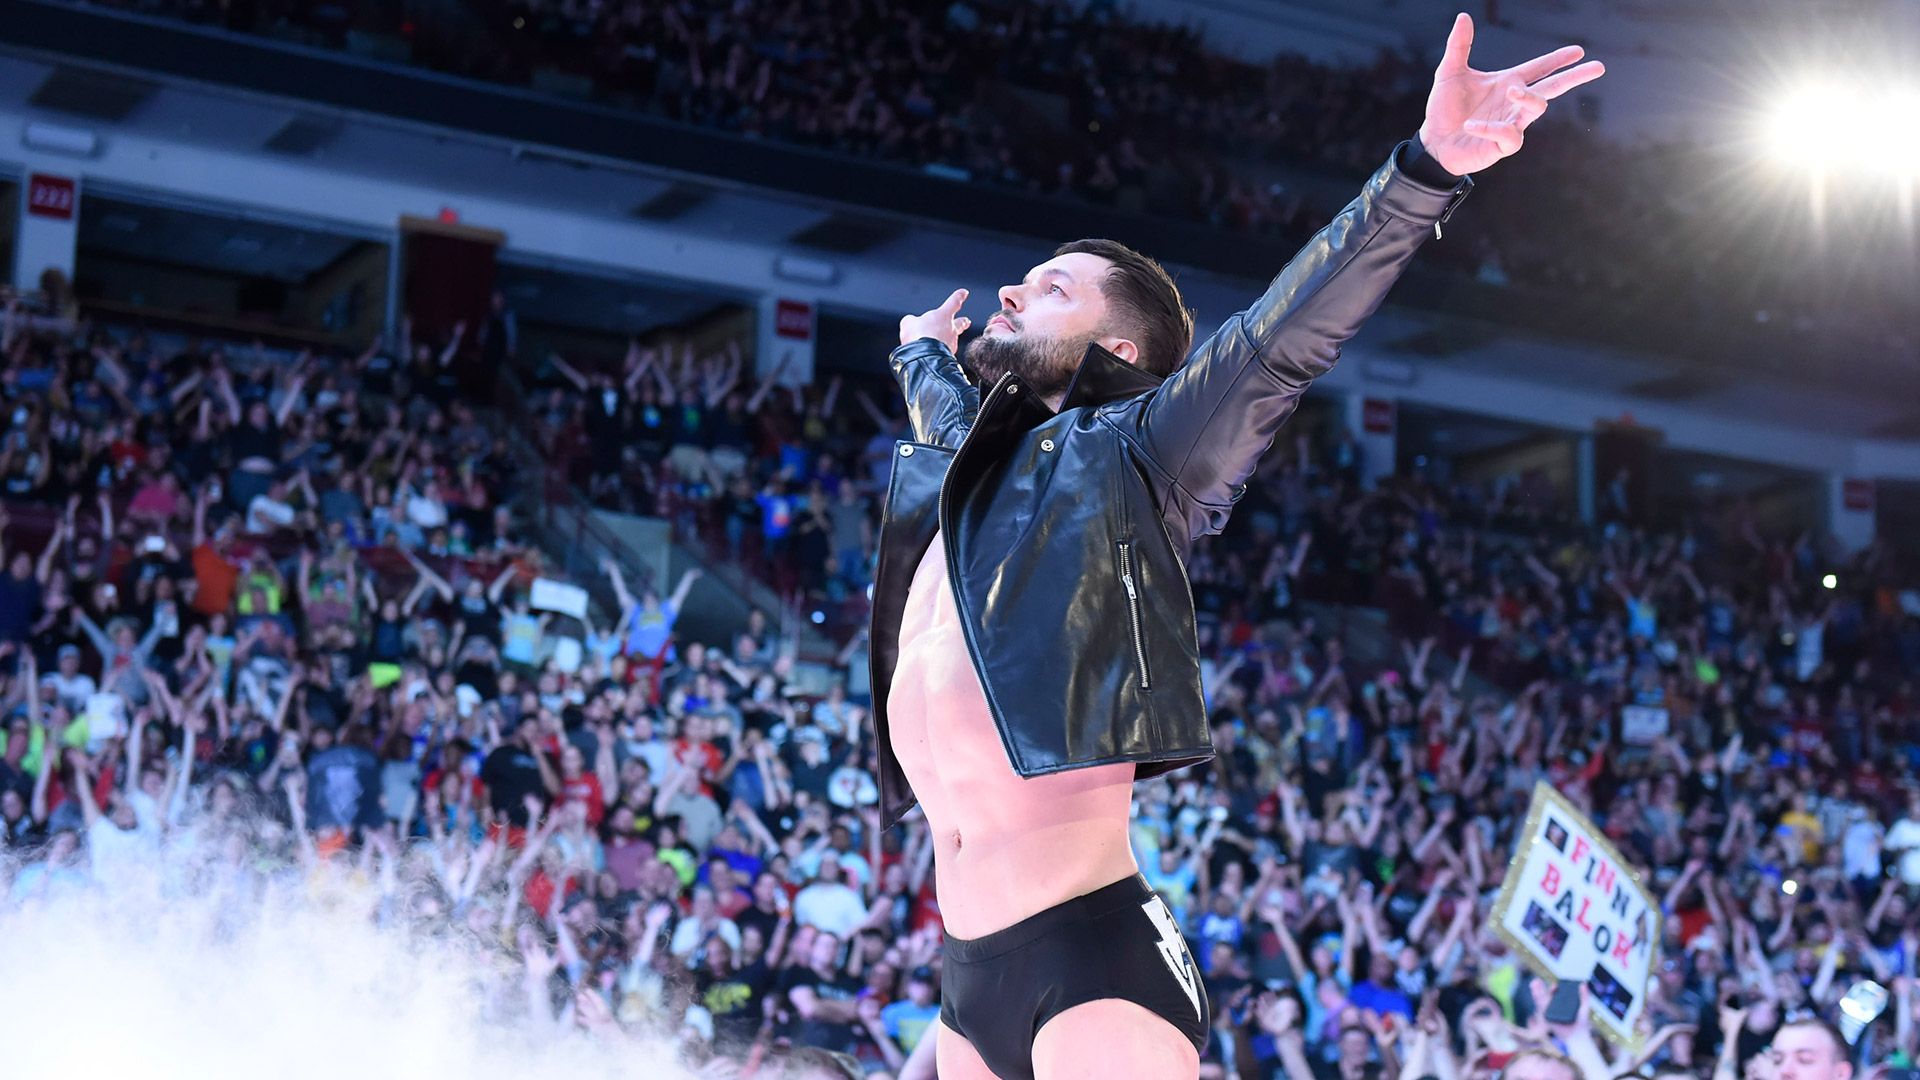 finn balor hd wallpapers,performance,music artist,audience,public event,performing arts